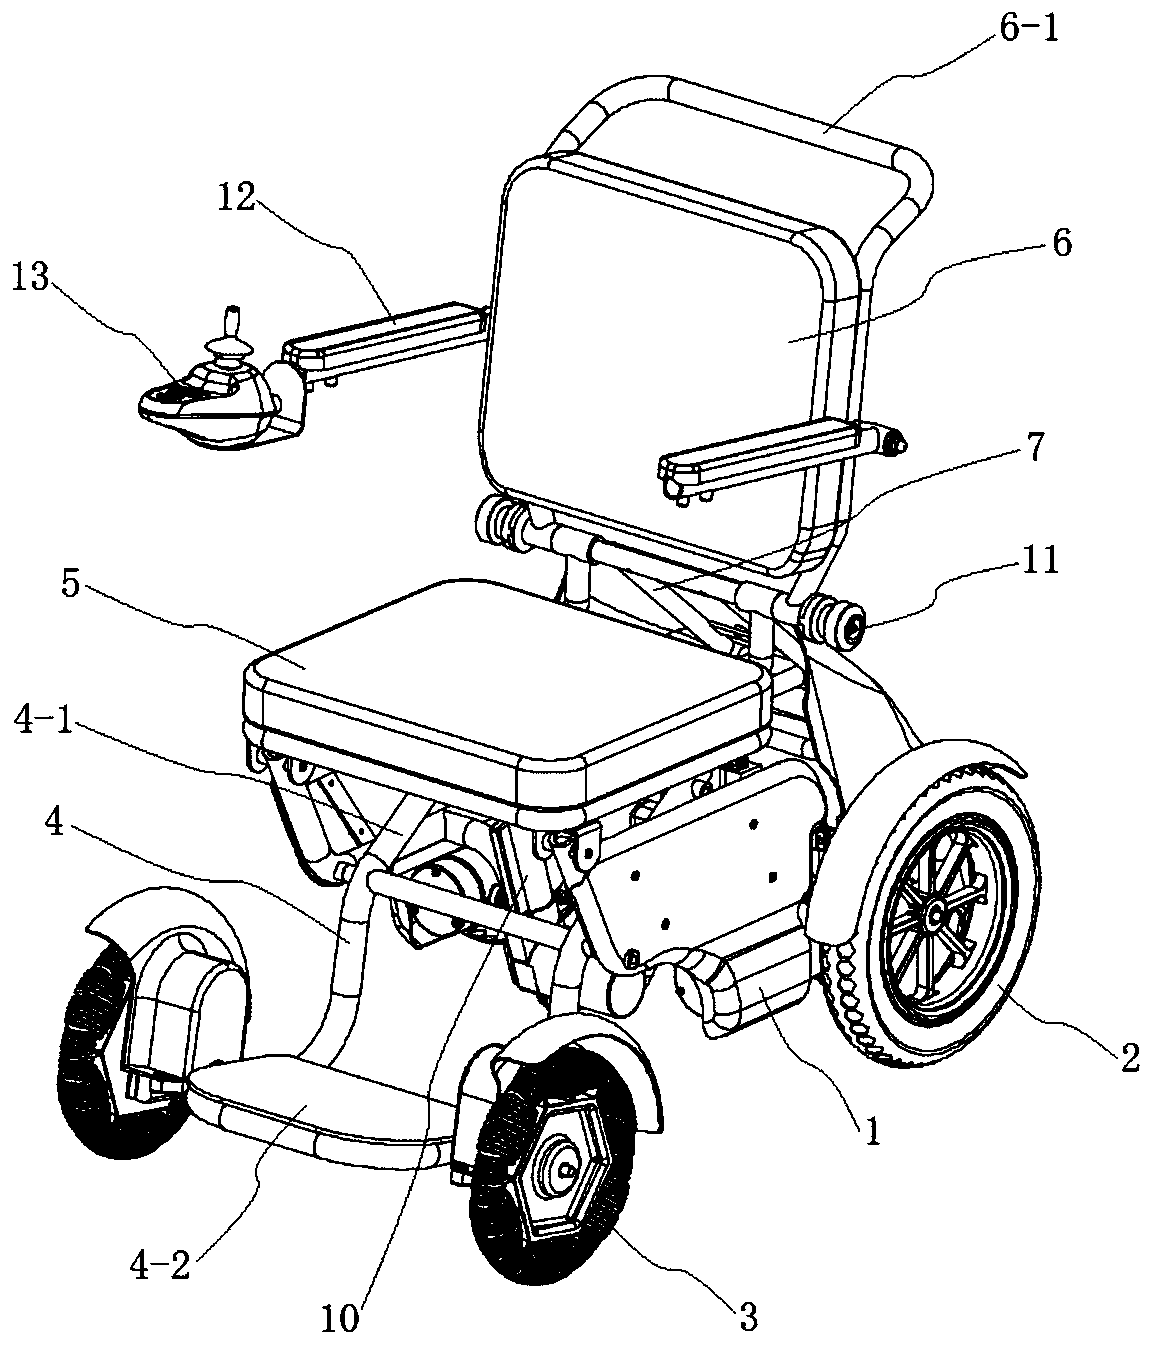 Auxiliary standing wheelchair with variable front and rear wheel wheelbase